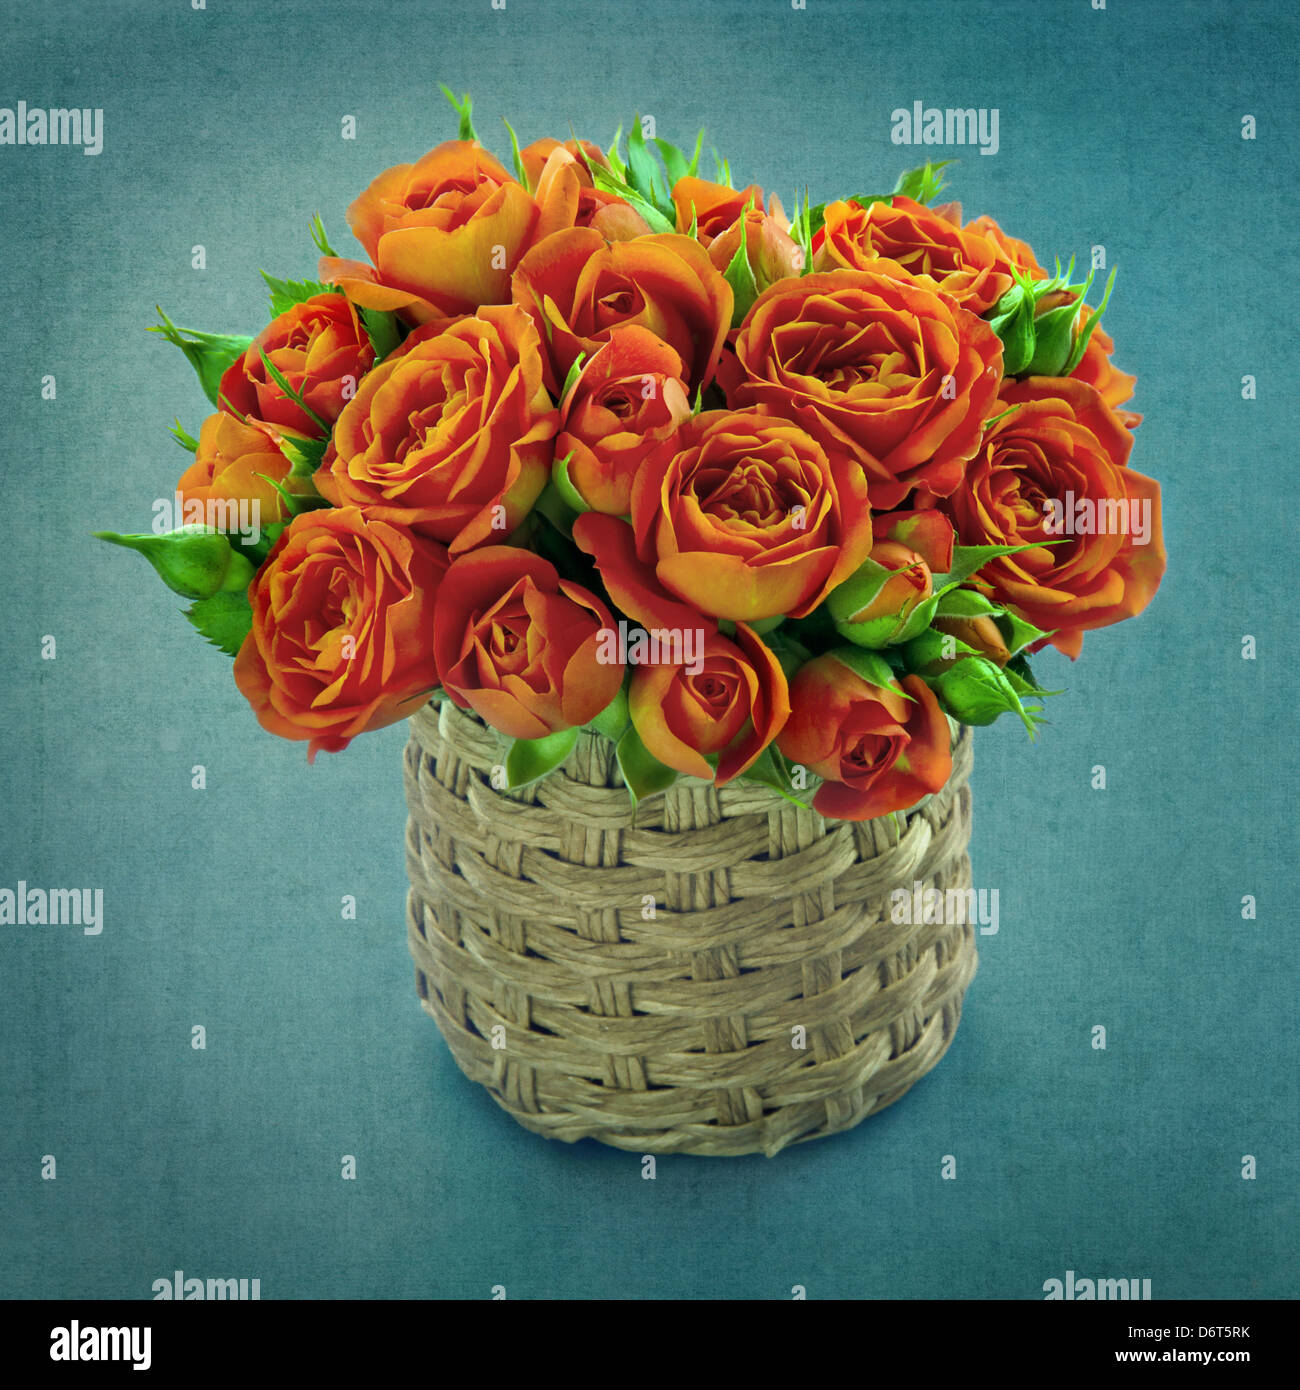 Bouquet of orange roses in a vase on blue vintage shabby chic background Stock Photo